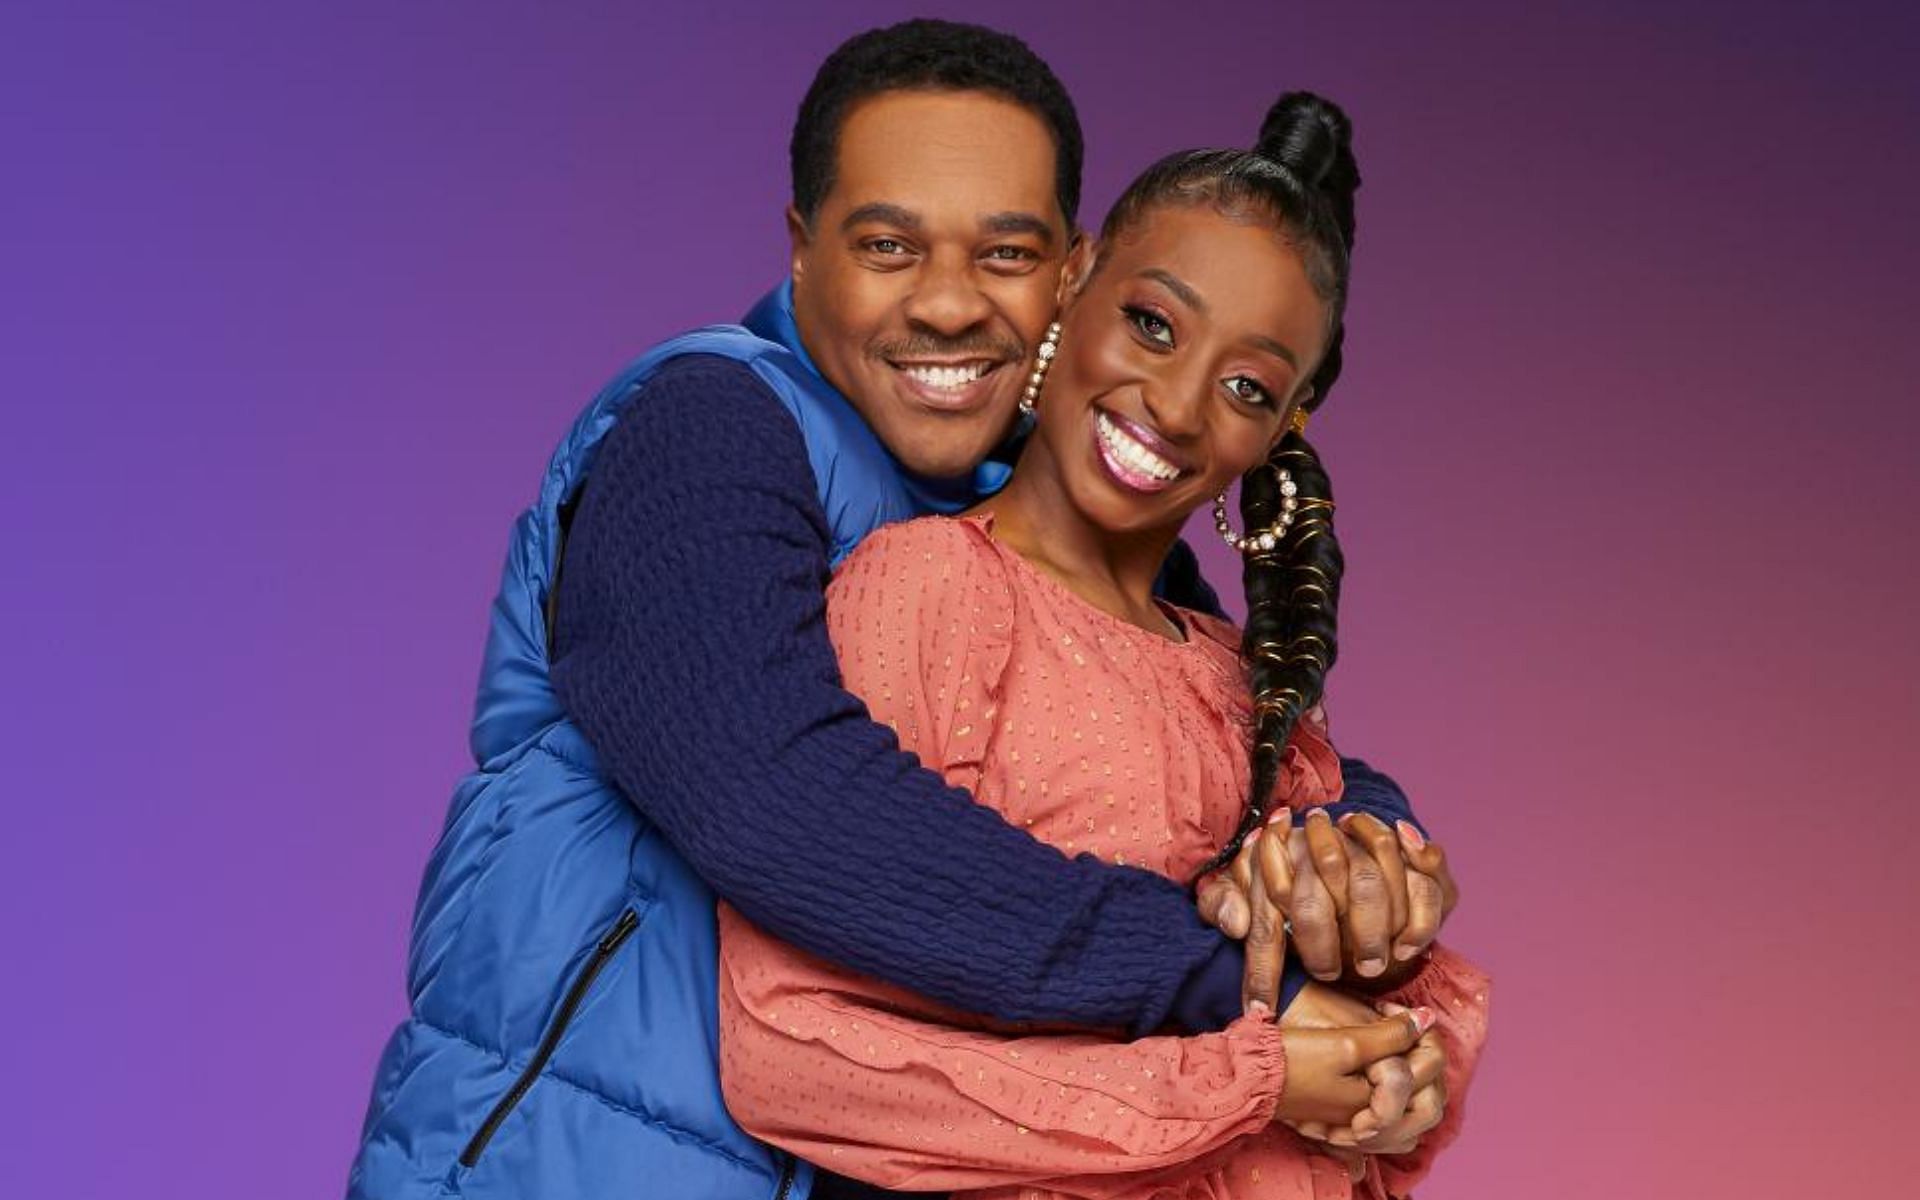 Deon and Karen Derrico are the stars of the show (Image via TLC)